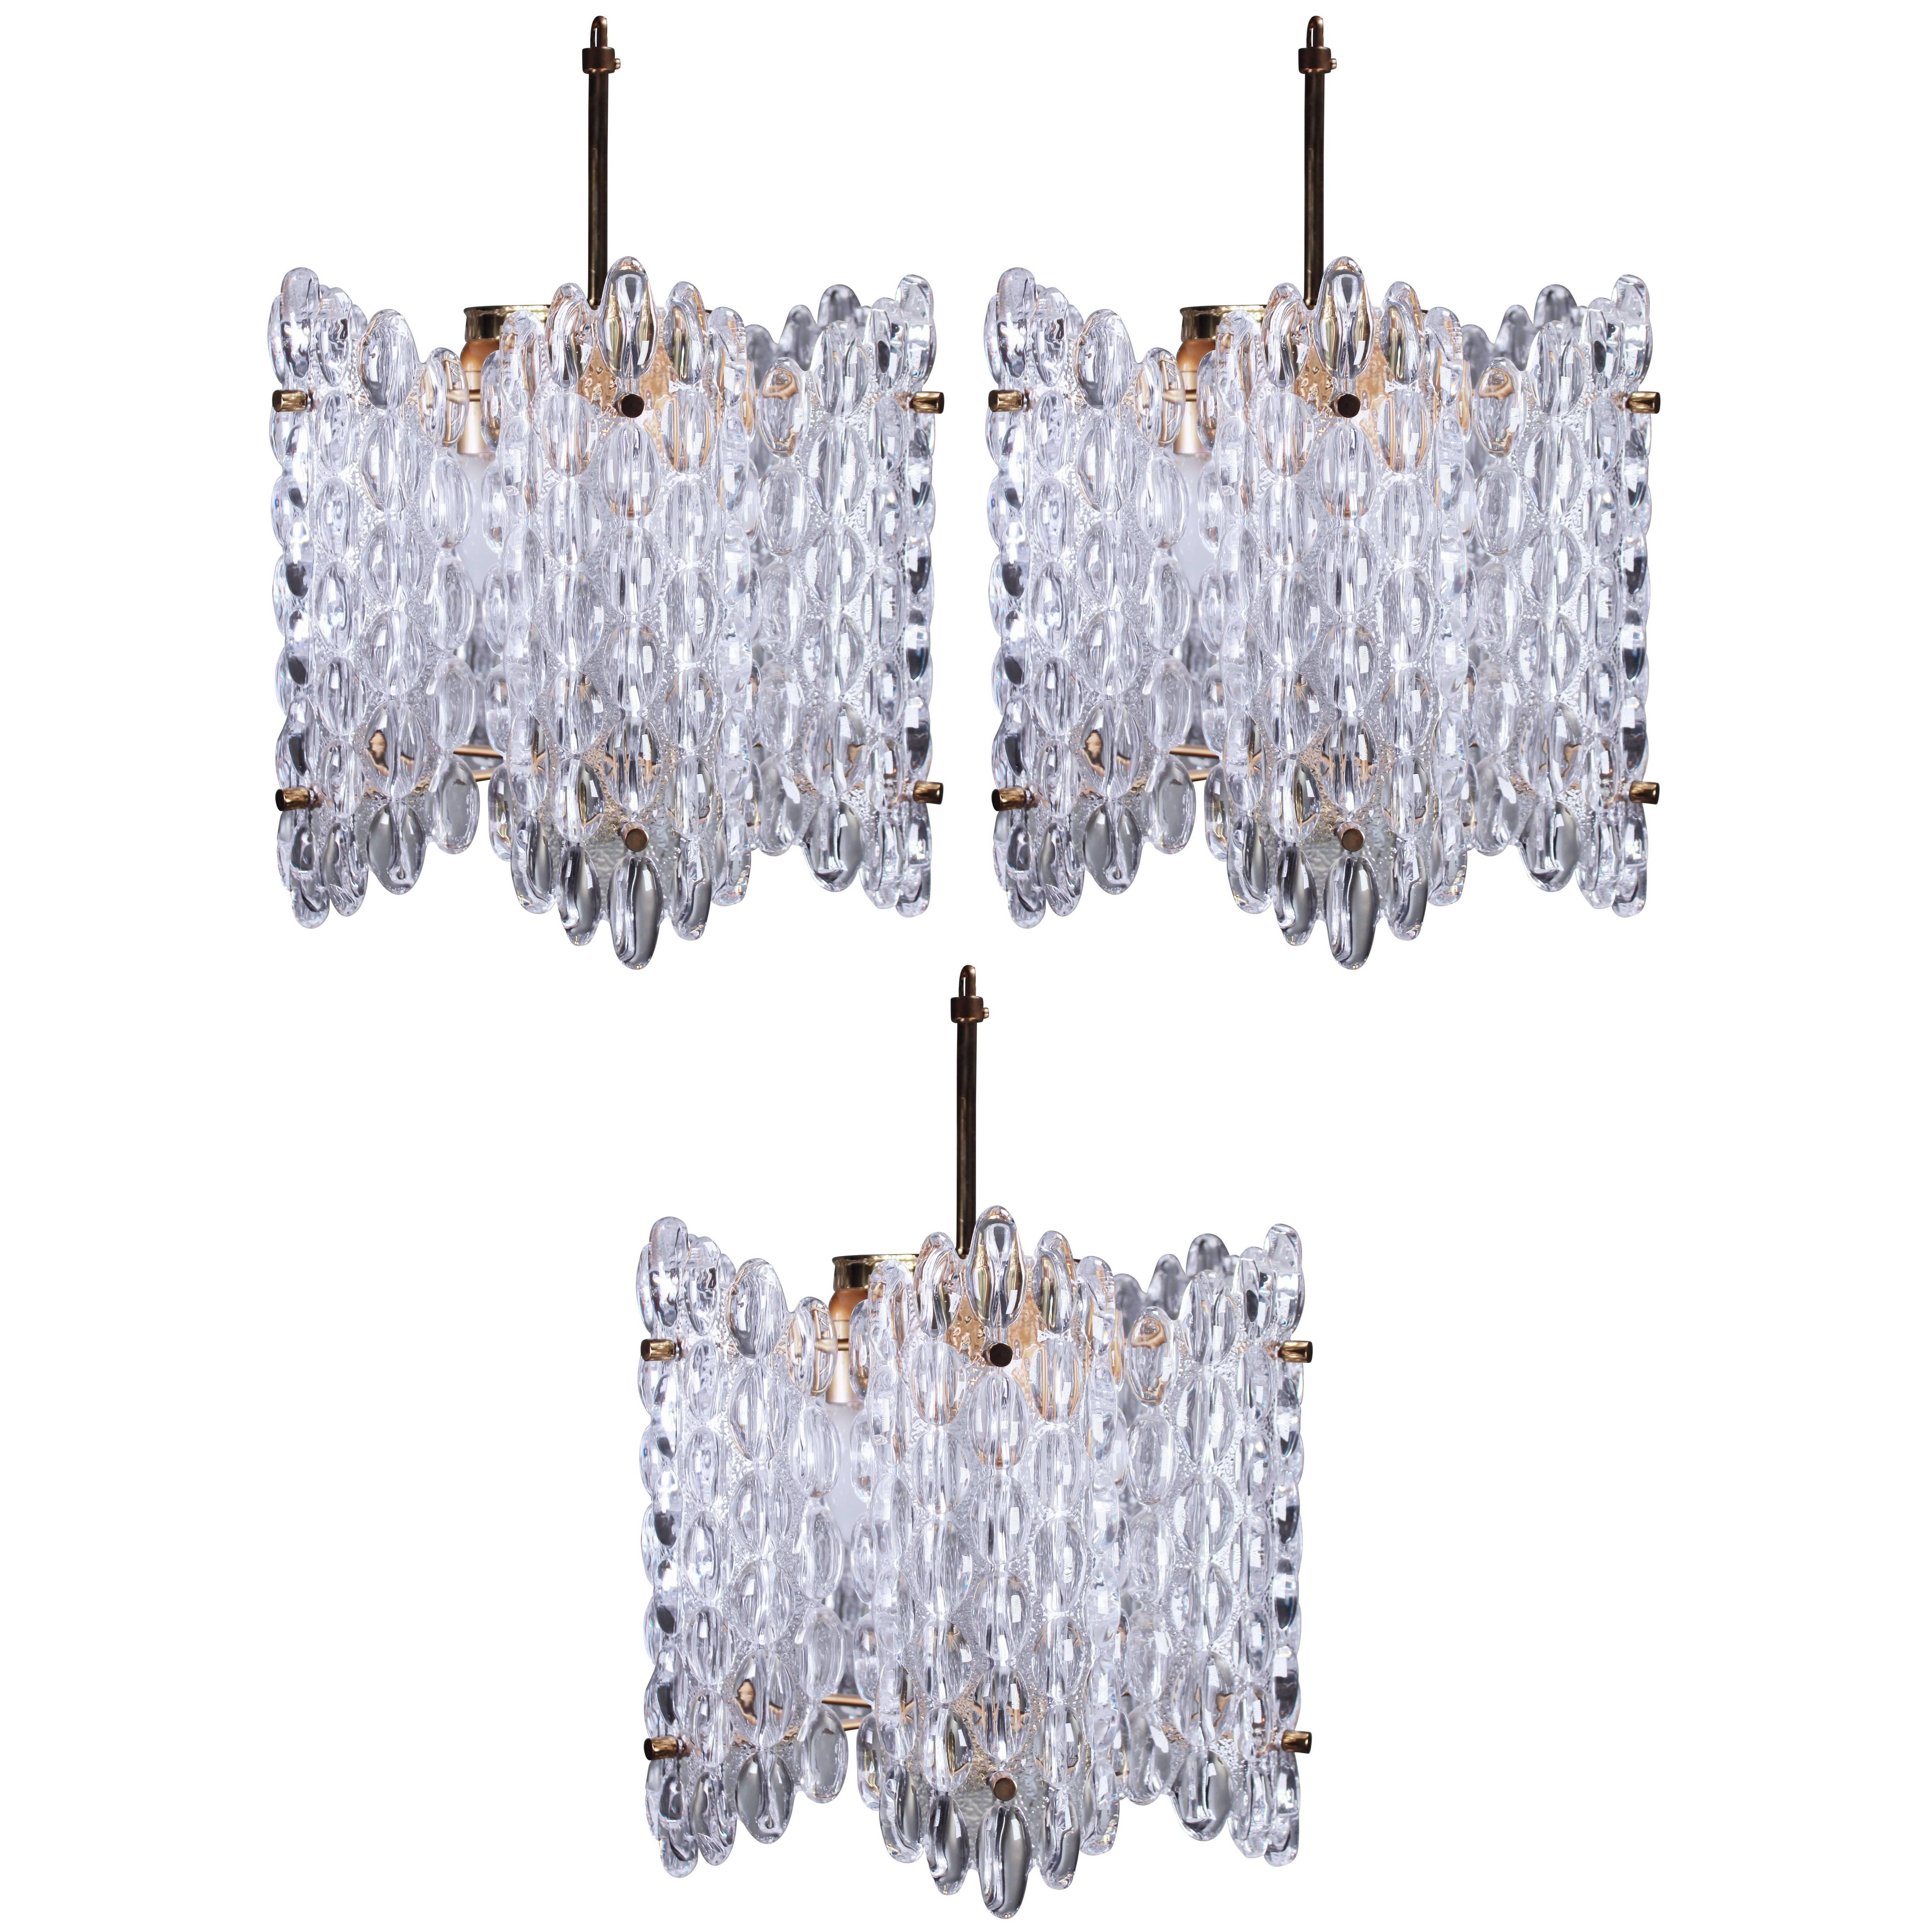 Large Orrefors Mid Century Crystal Chandeliers by Carl Fagerlund, 1950s